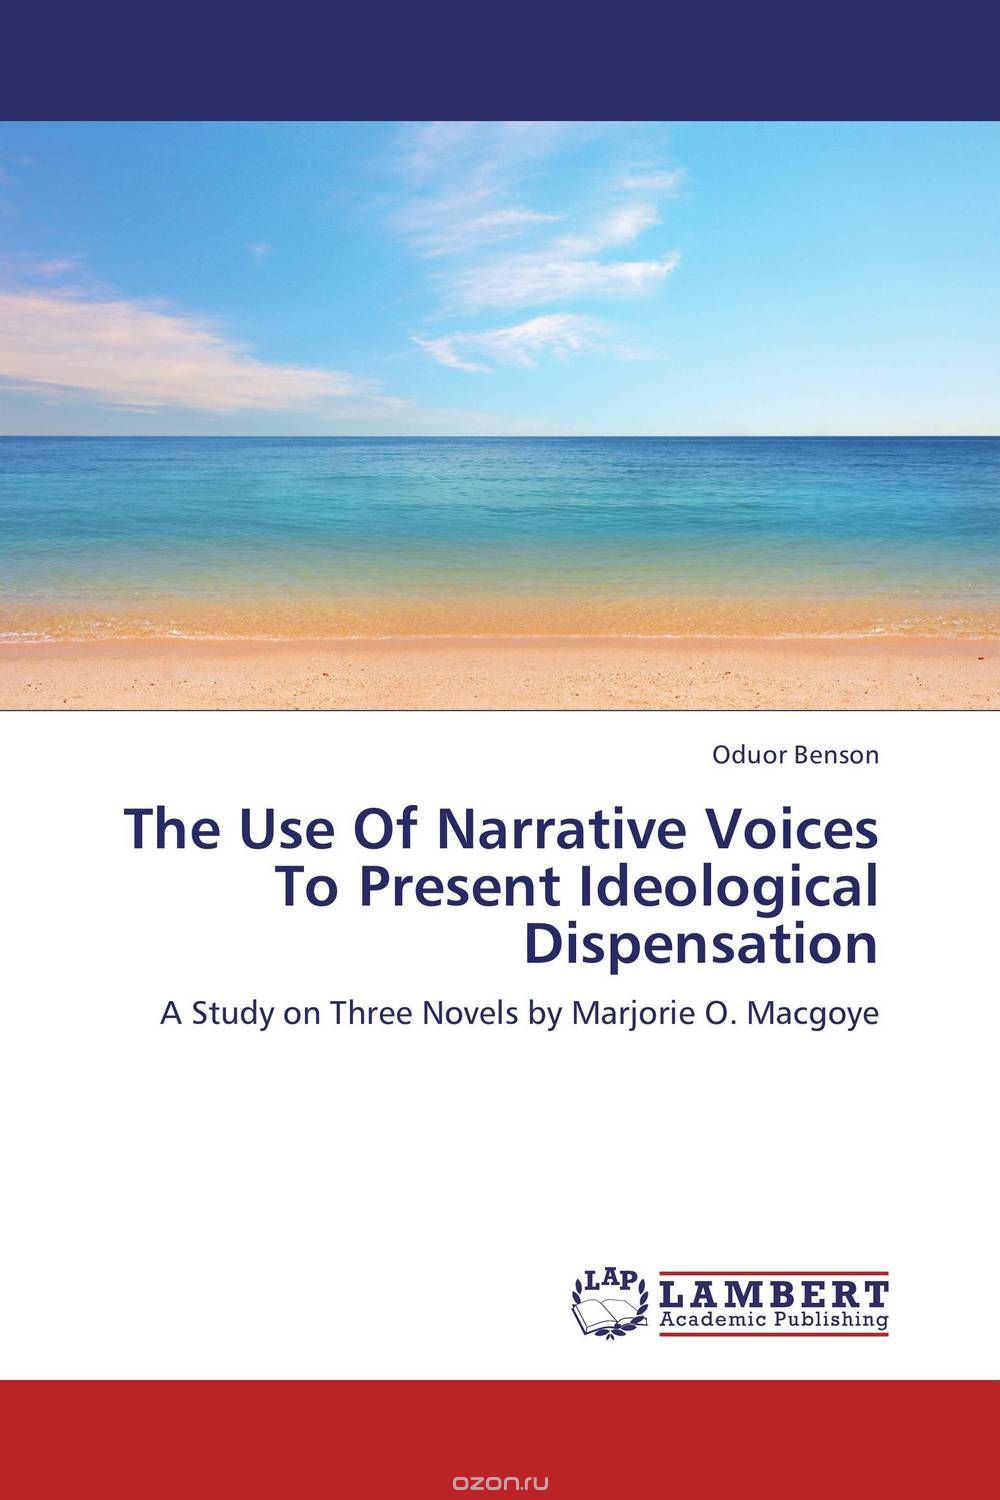 The Use Of Narrative Voices To Present Ideological Dispensation